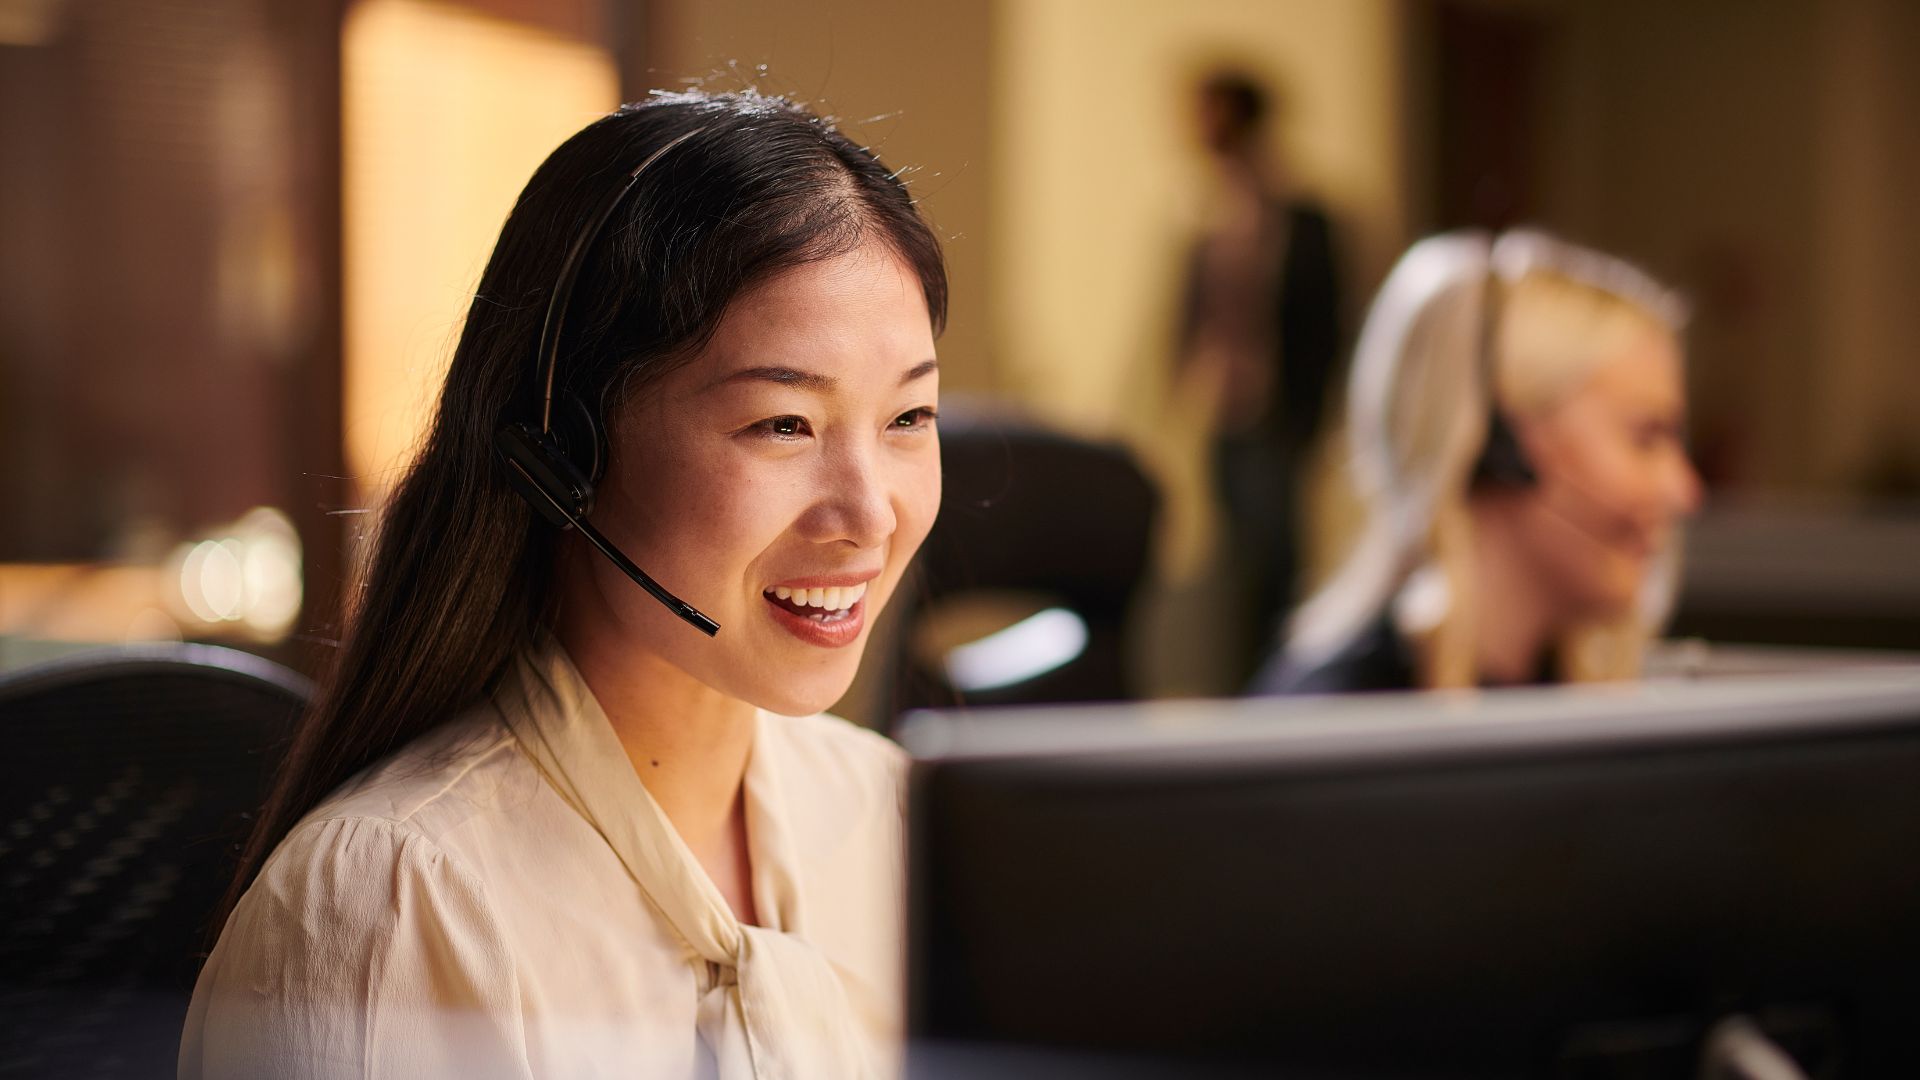 Taking Customer Care to the Next Level with Personalized Call Center Services - Featured Image